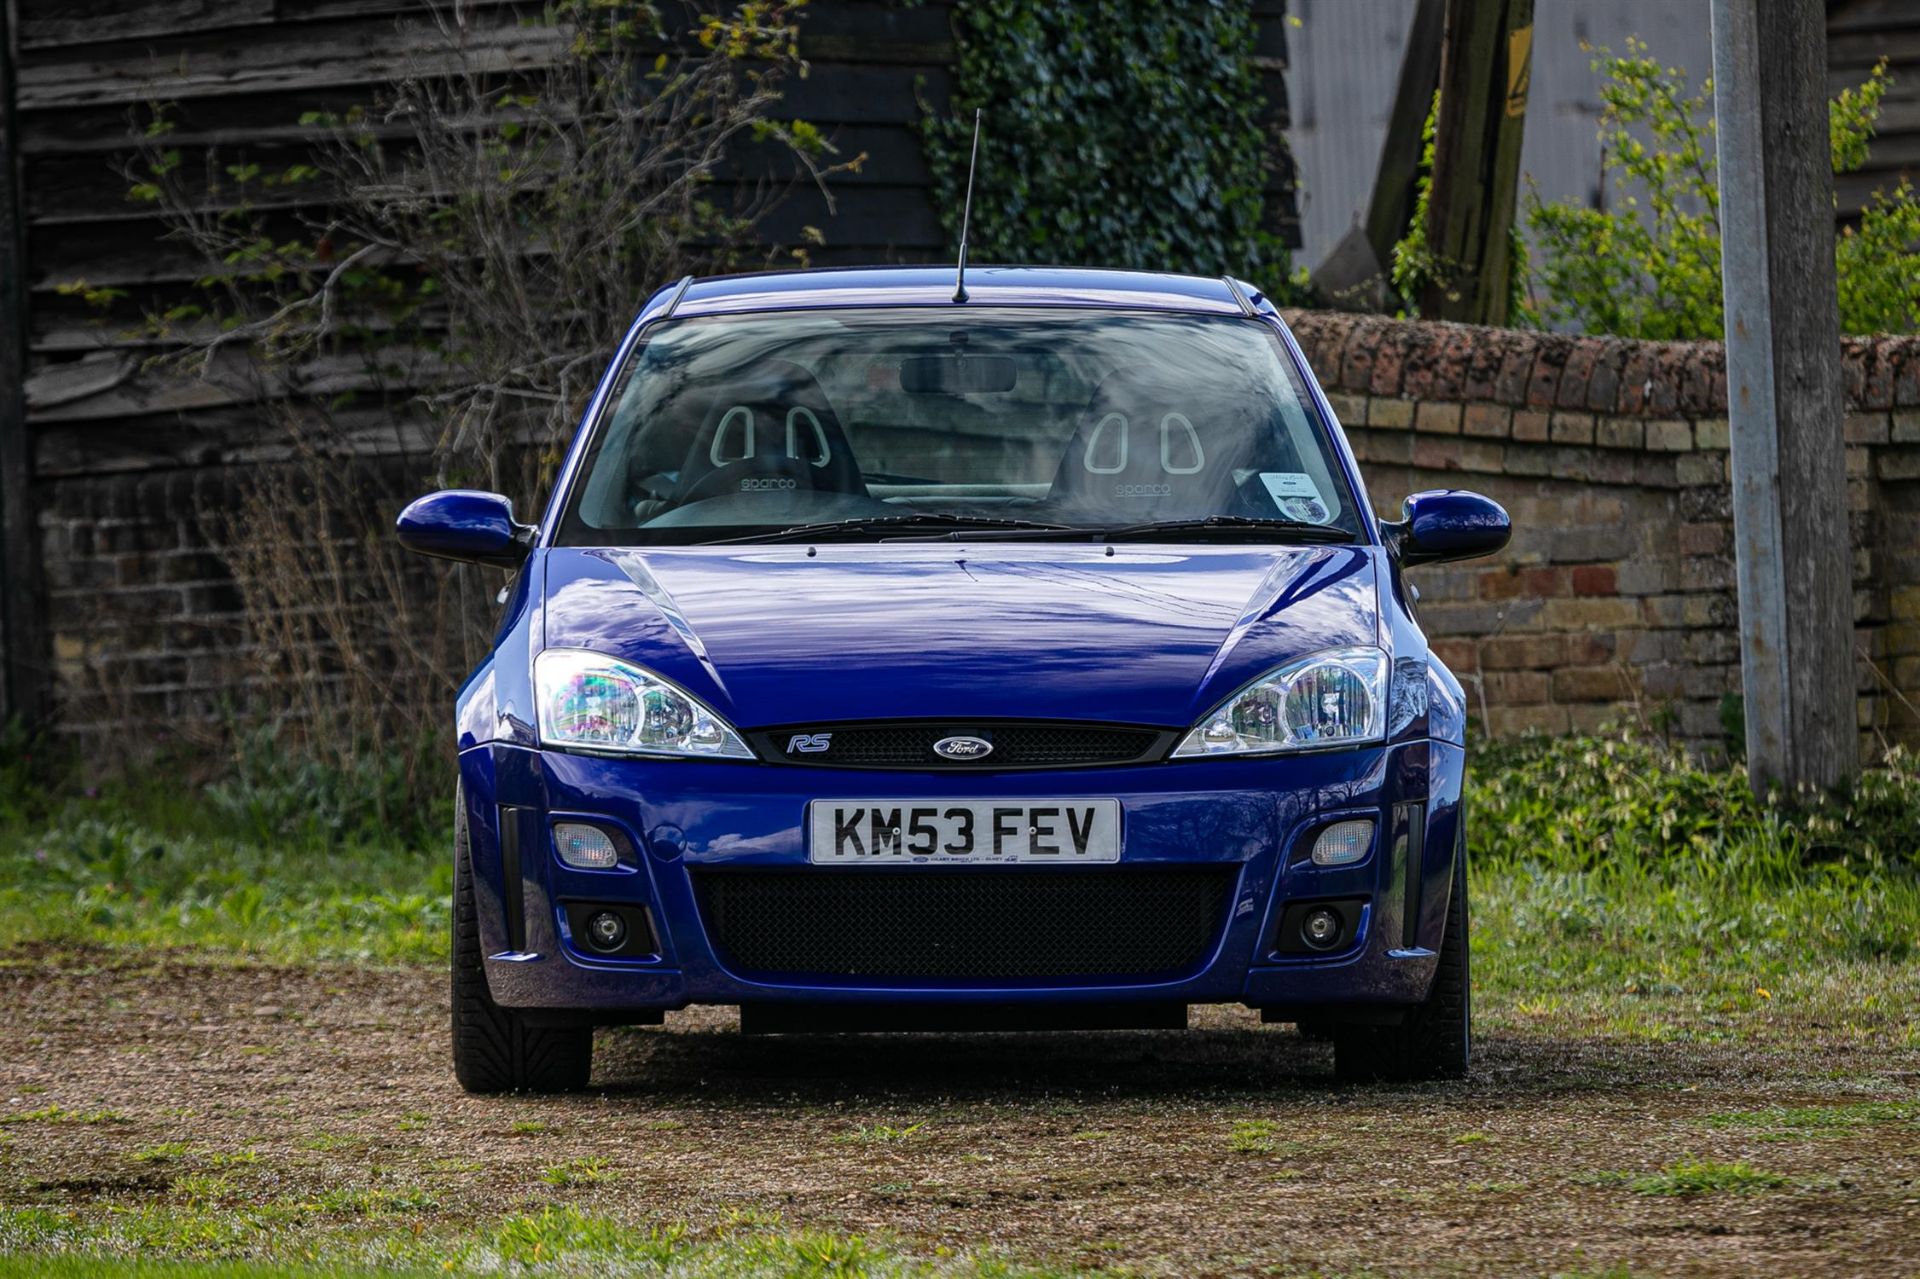 2003 Ford Focus RS Mk1 - 3265 Miles - Image 6 of 10